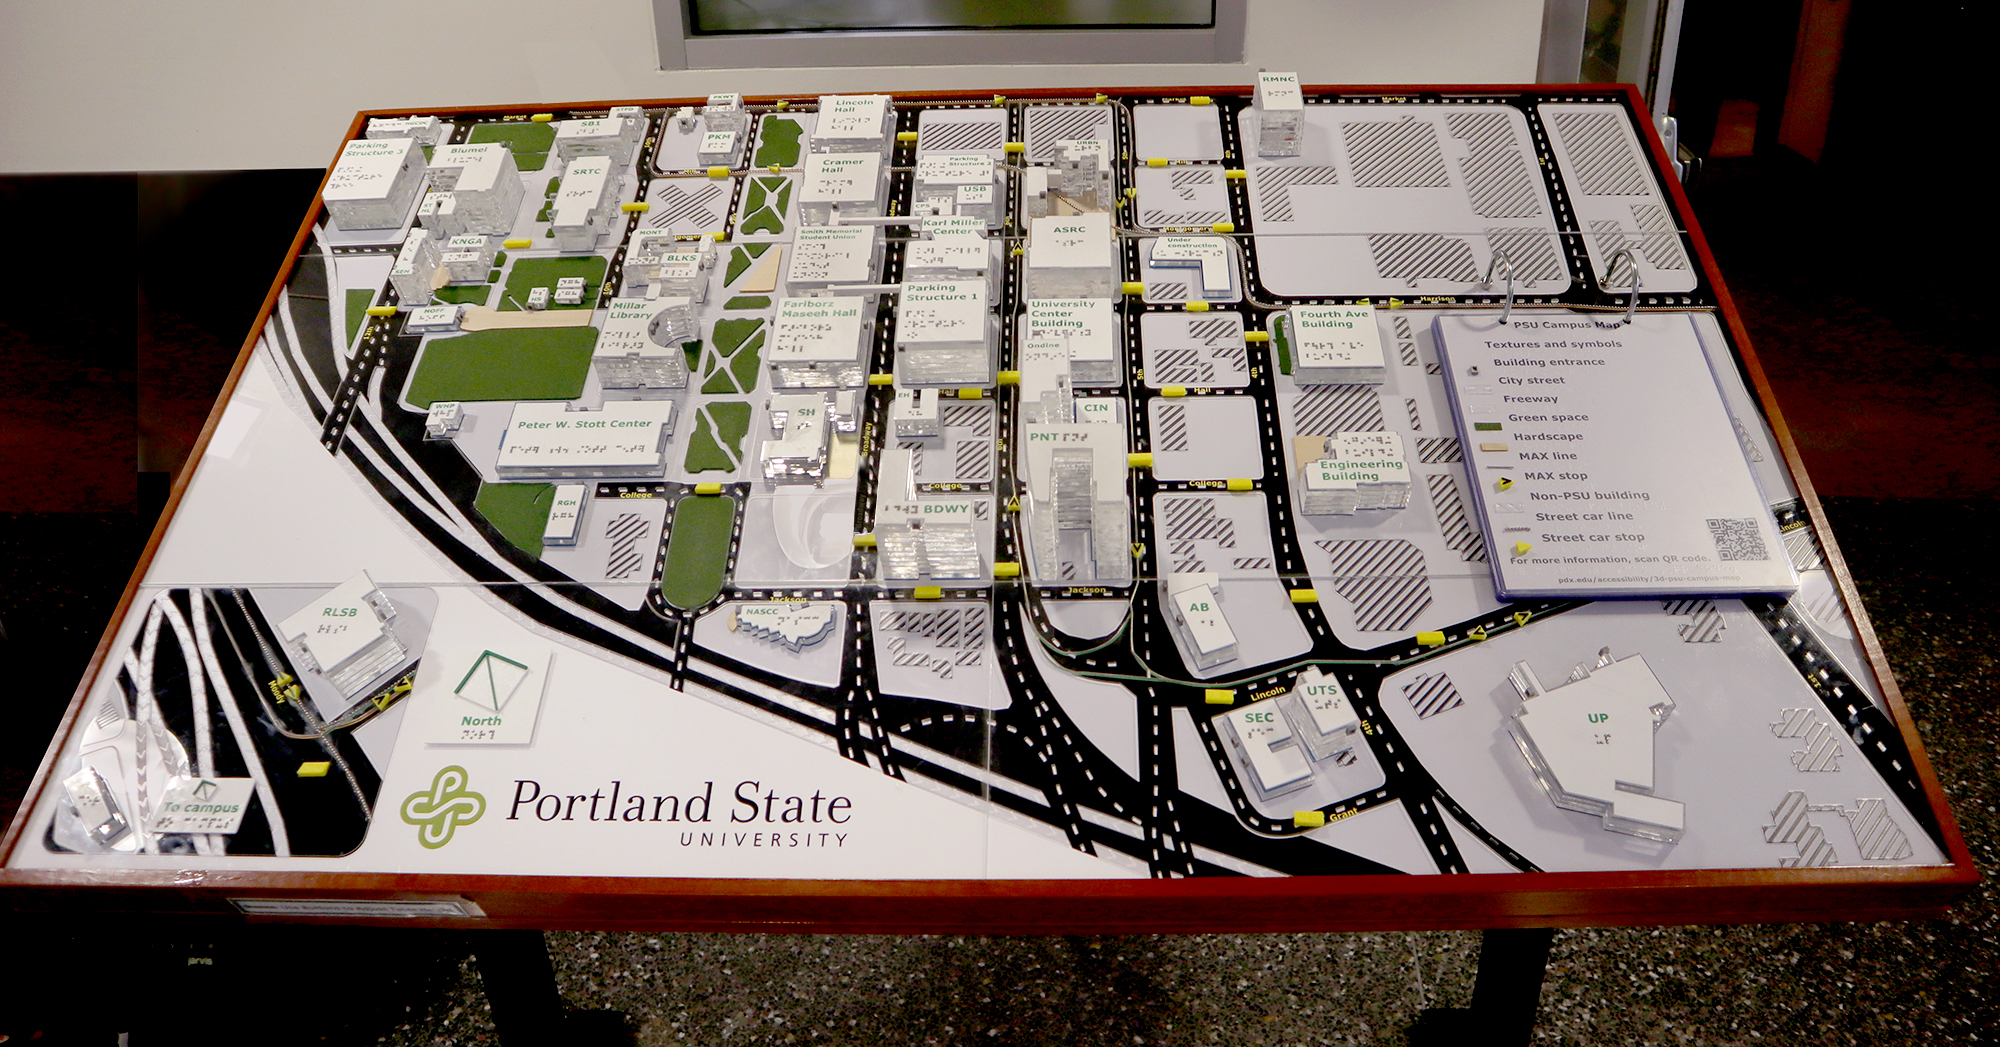 An approximately 3 by 5 foot 3D map of the Portland State University campus, located in the Smith Memorial Student Union lobby, 1825 SW Broadway, Portland, OR 97201.